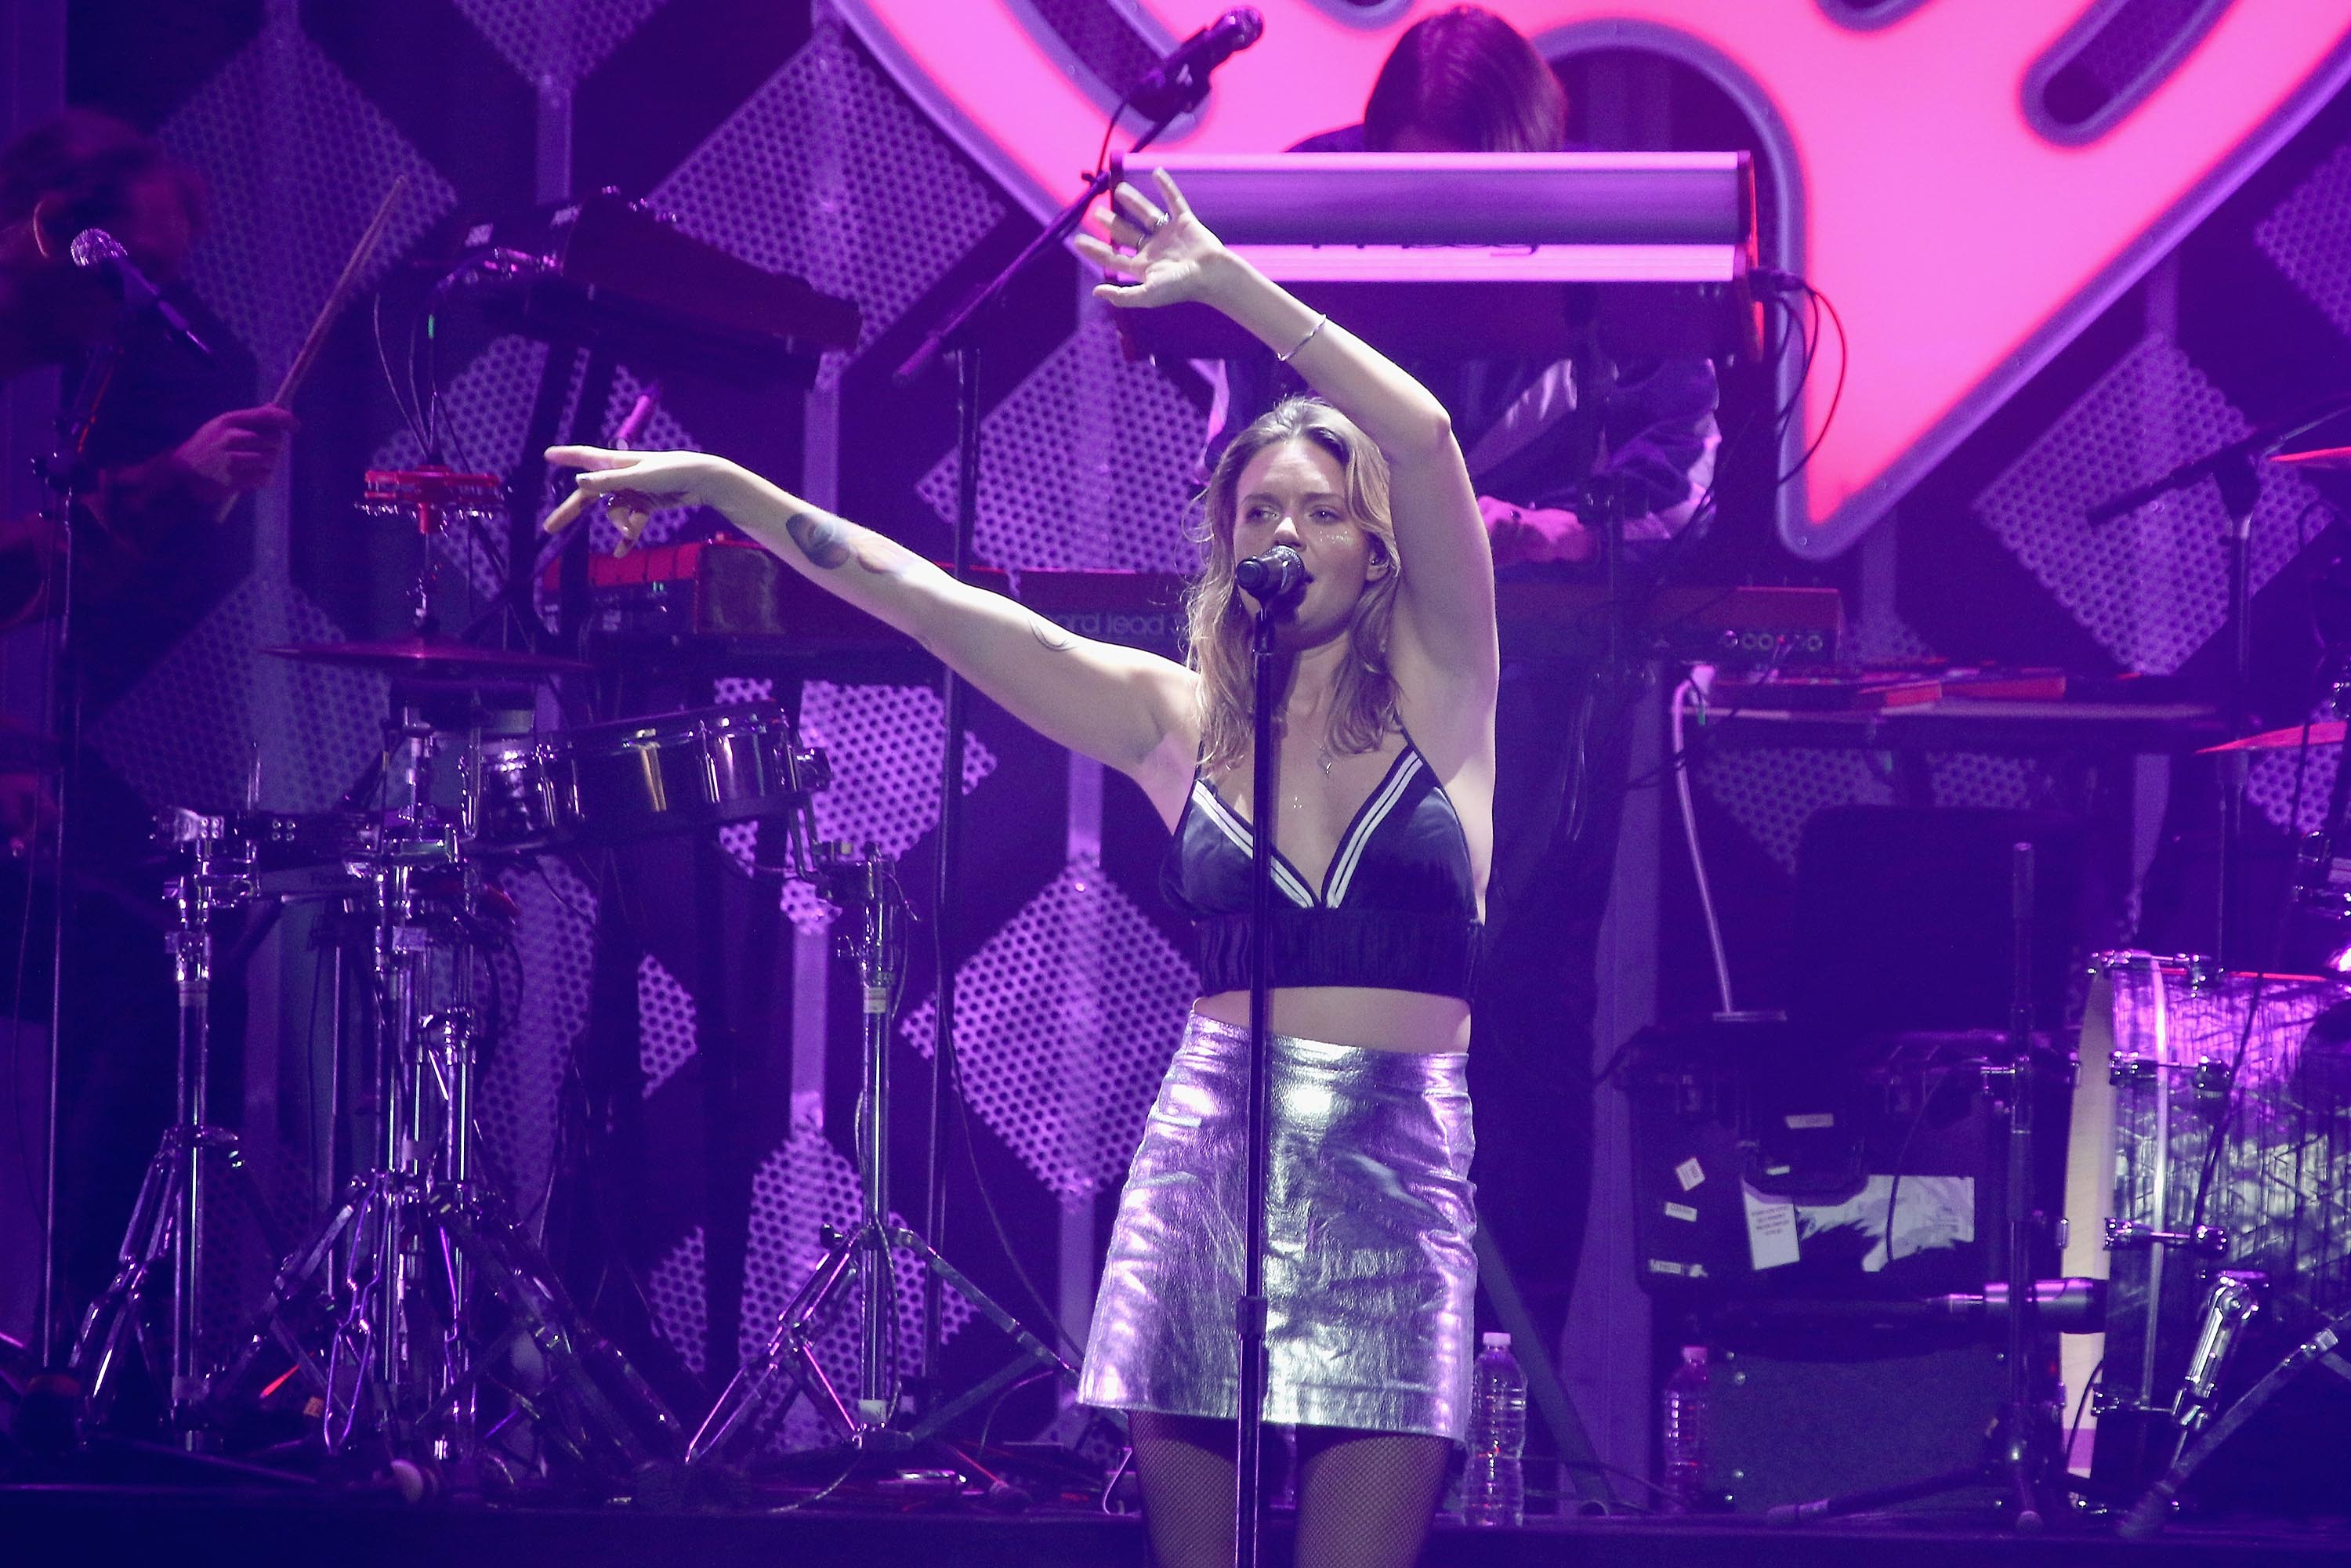 Tove Lo performs on stage during the Y100’s iHeartRadio Jingle Ball 2016